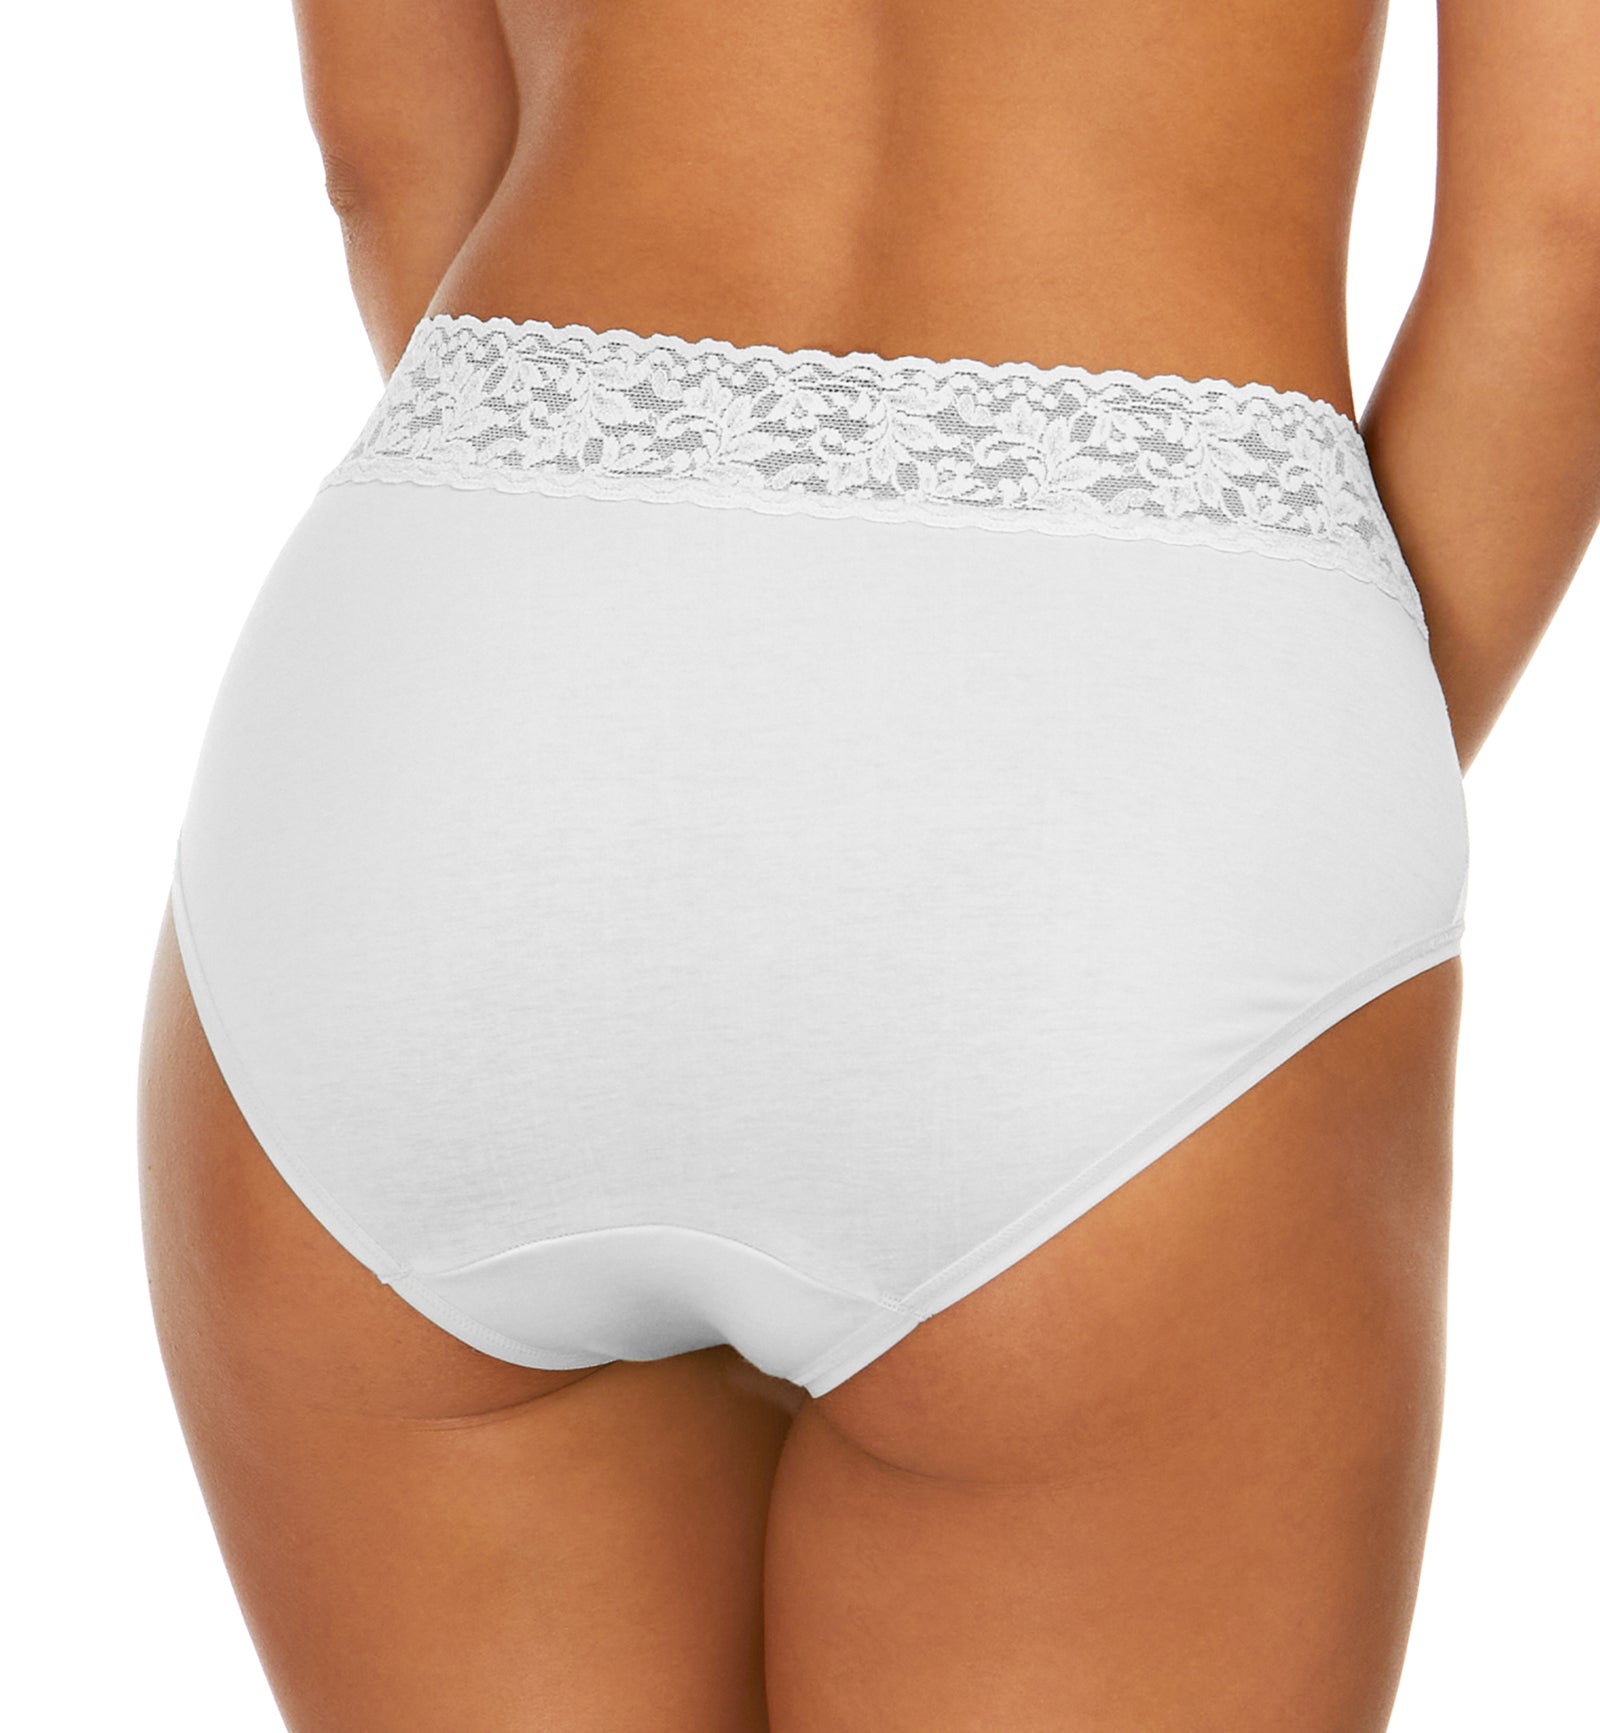 Hanky Panky Cotton French Brief with Lace (892461),Small,White - White,Small